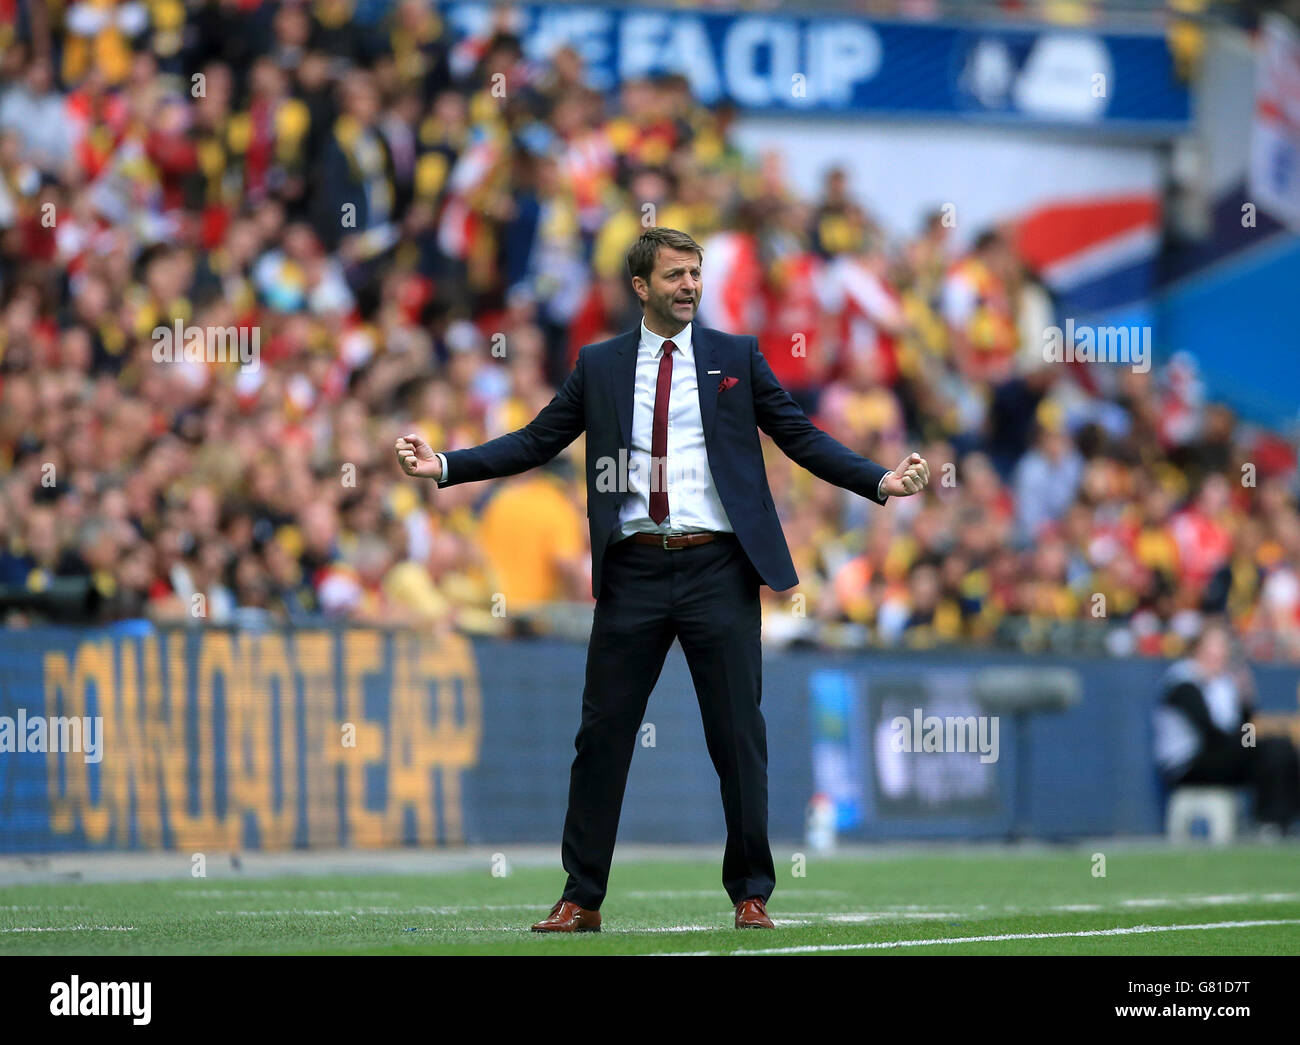 Aston Villa manager Tim Sherwood gestures on the touchline during the FA Cup Final at Wembley Stadium, London. PRESS ASSOCIATION Photo. Picture date: Saturday May 30, 2015. See PA Story SOCCER FA Cup. Photo credit should read: Nick Potts/PA Wire. RESTRICTIONS: Maximum 45 images during a match. No video emulation or promotion as 'live'. No use in games, competitions, merchandise, betting or single club/player services. No use with unofficial audio, video, data, fixture Stock Photo